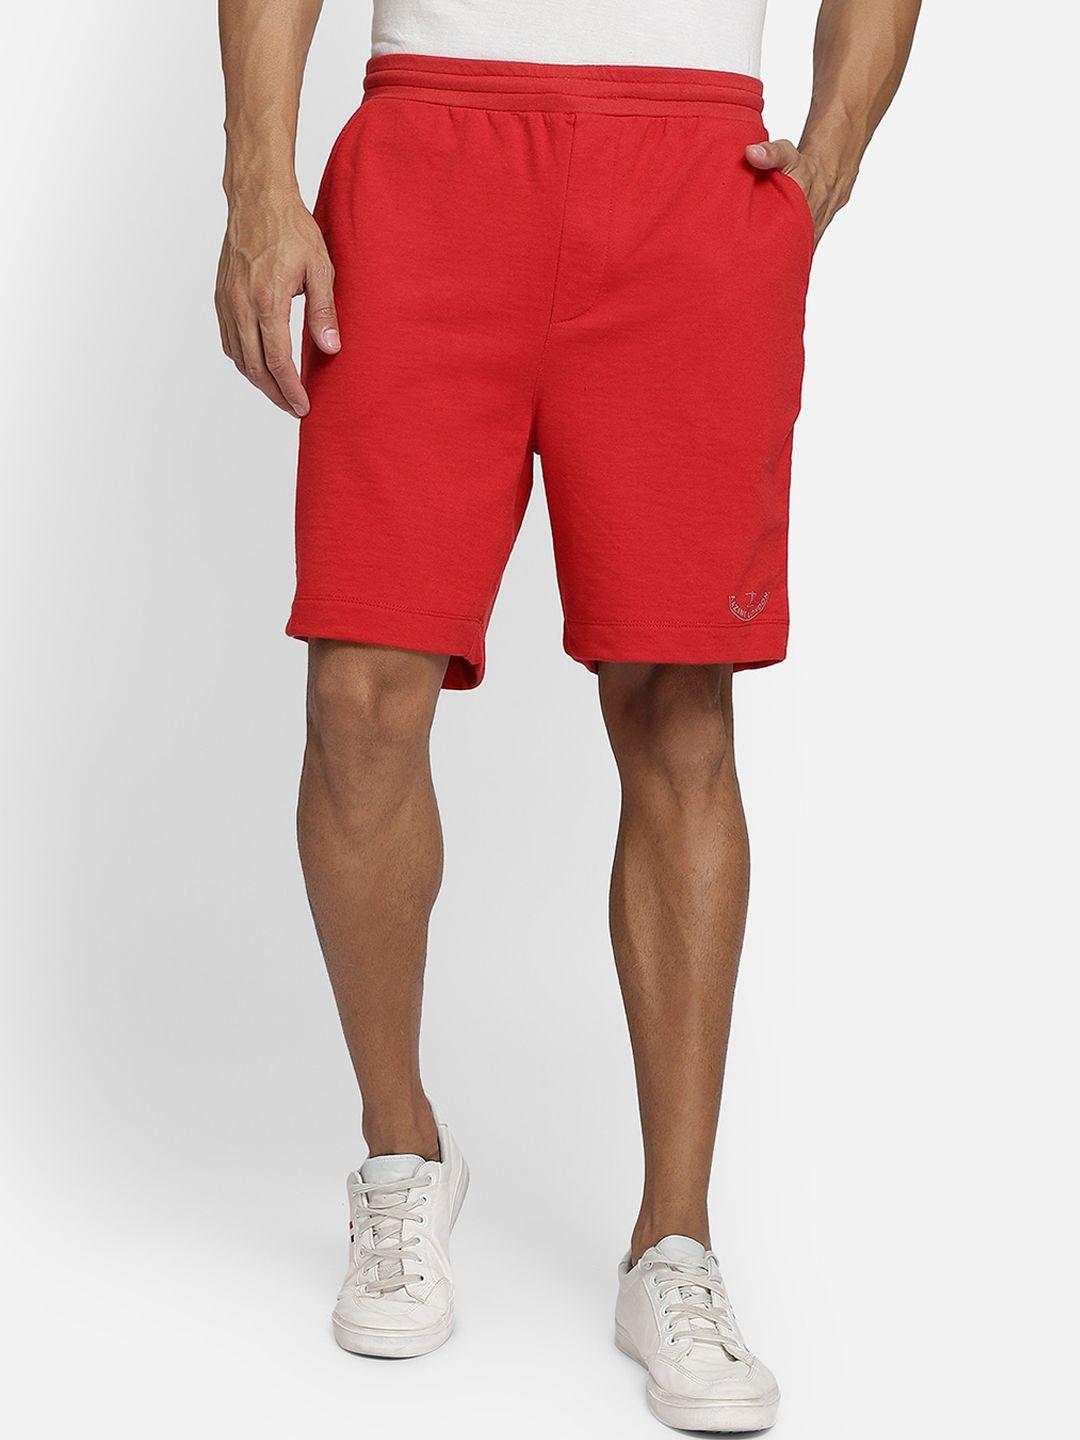 aazing-london-men-red-mid--rise-sports-shorts